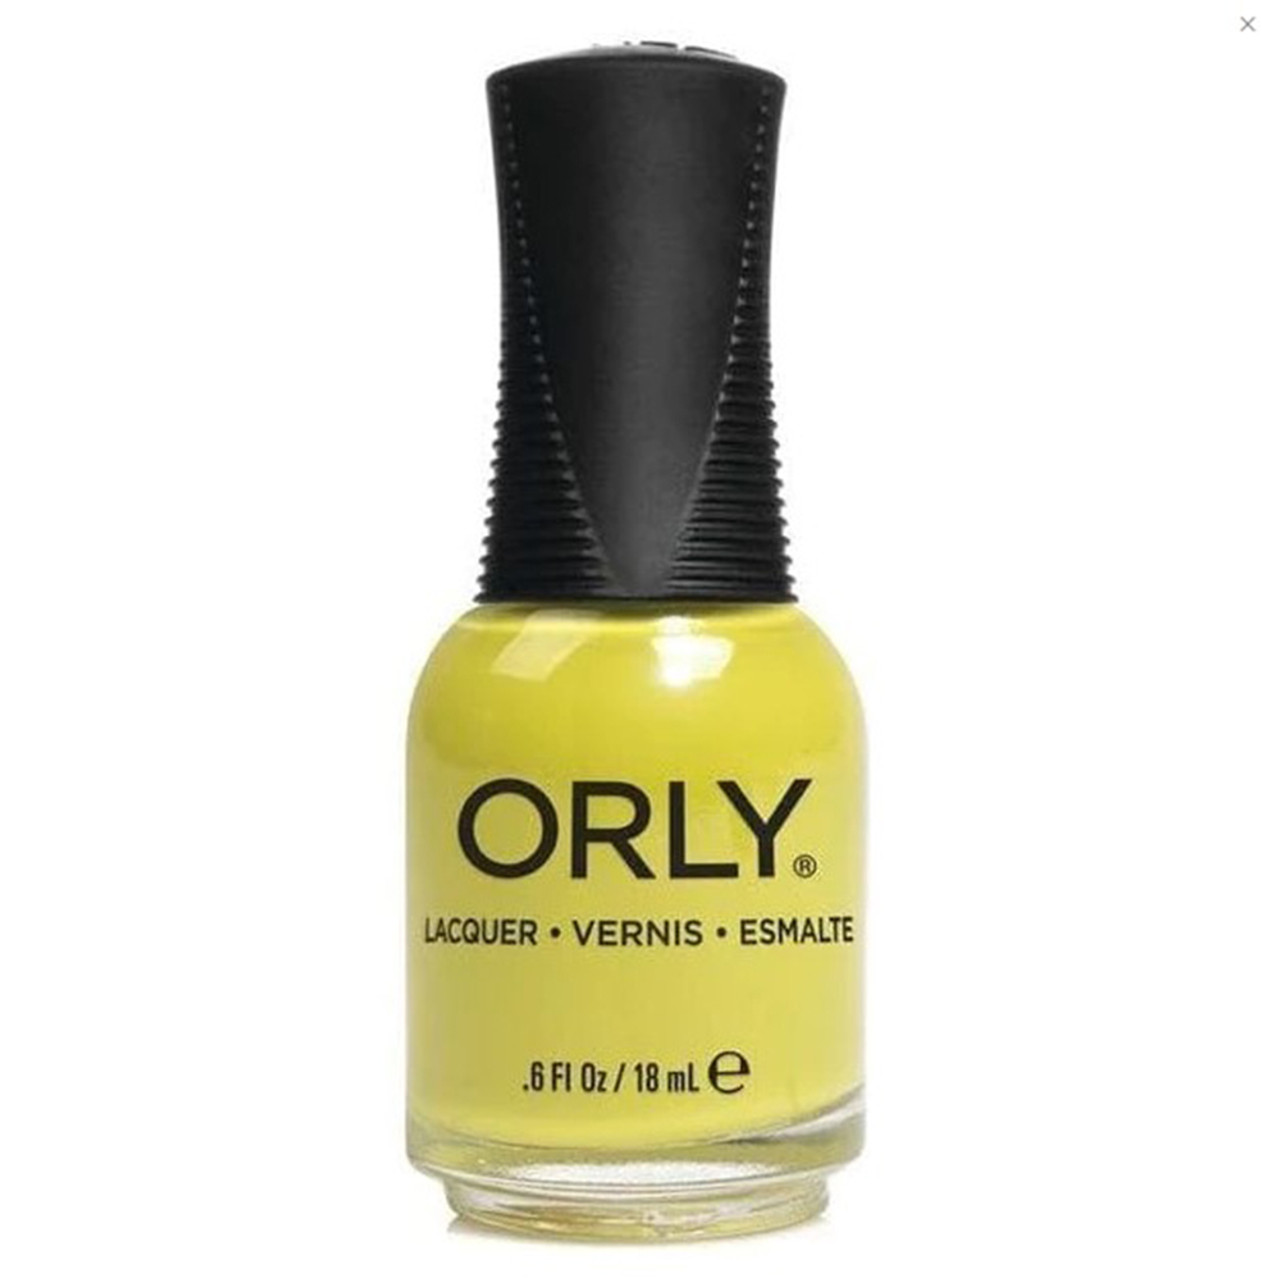 ORLY Nail Lacquer On a Whim - .6 fl oz / 18 mL